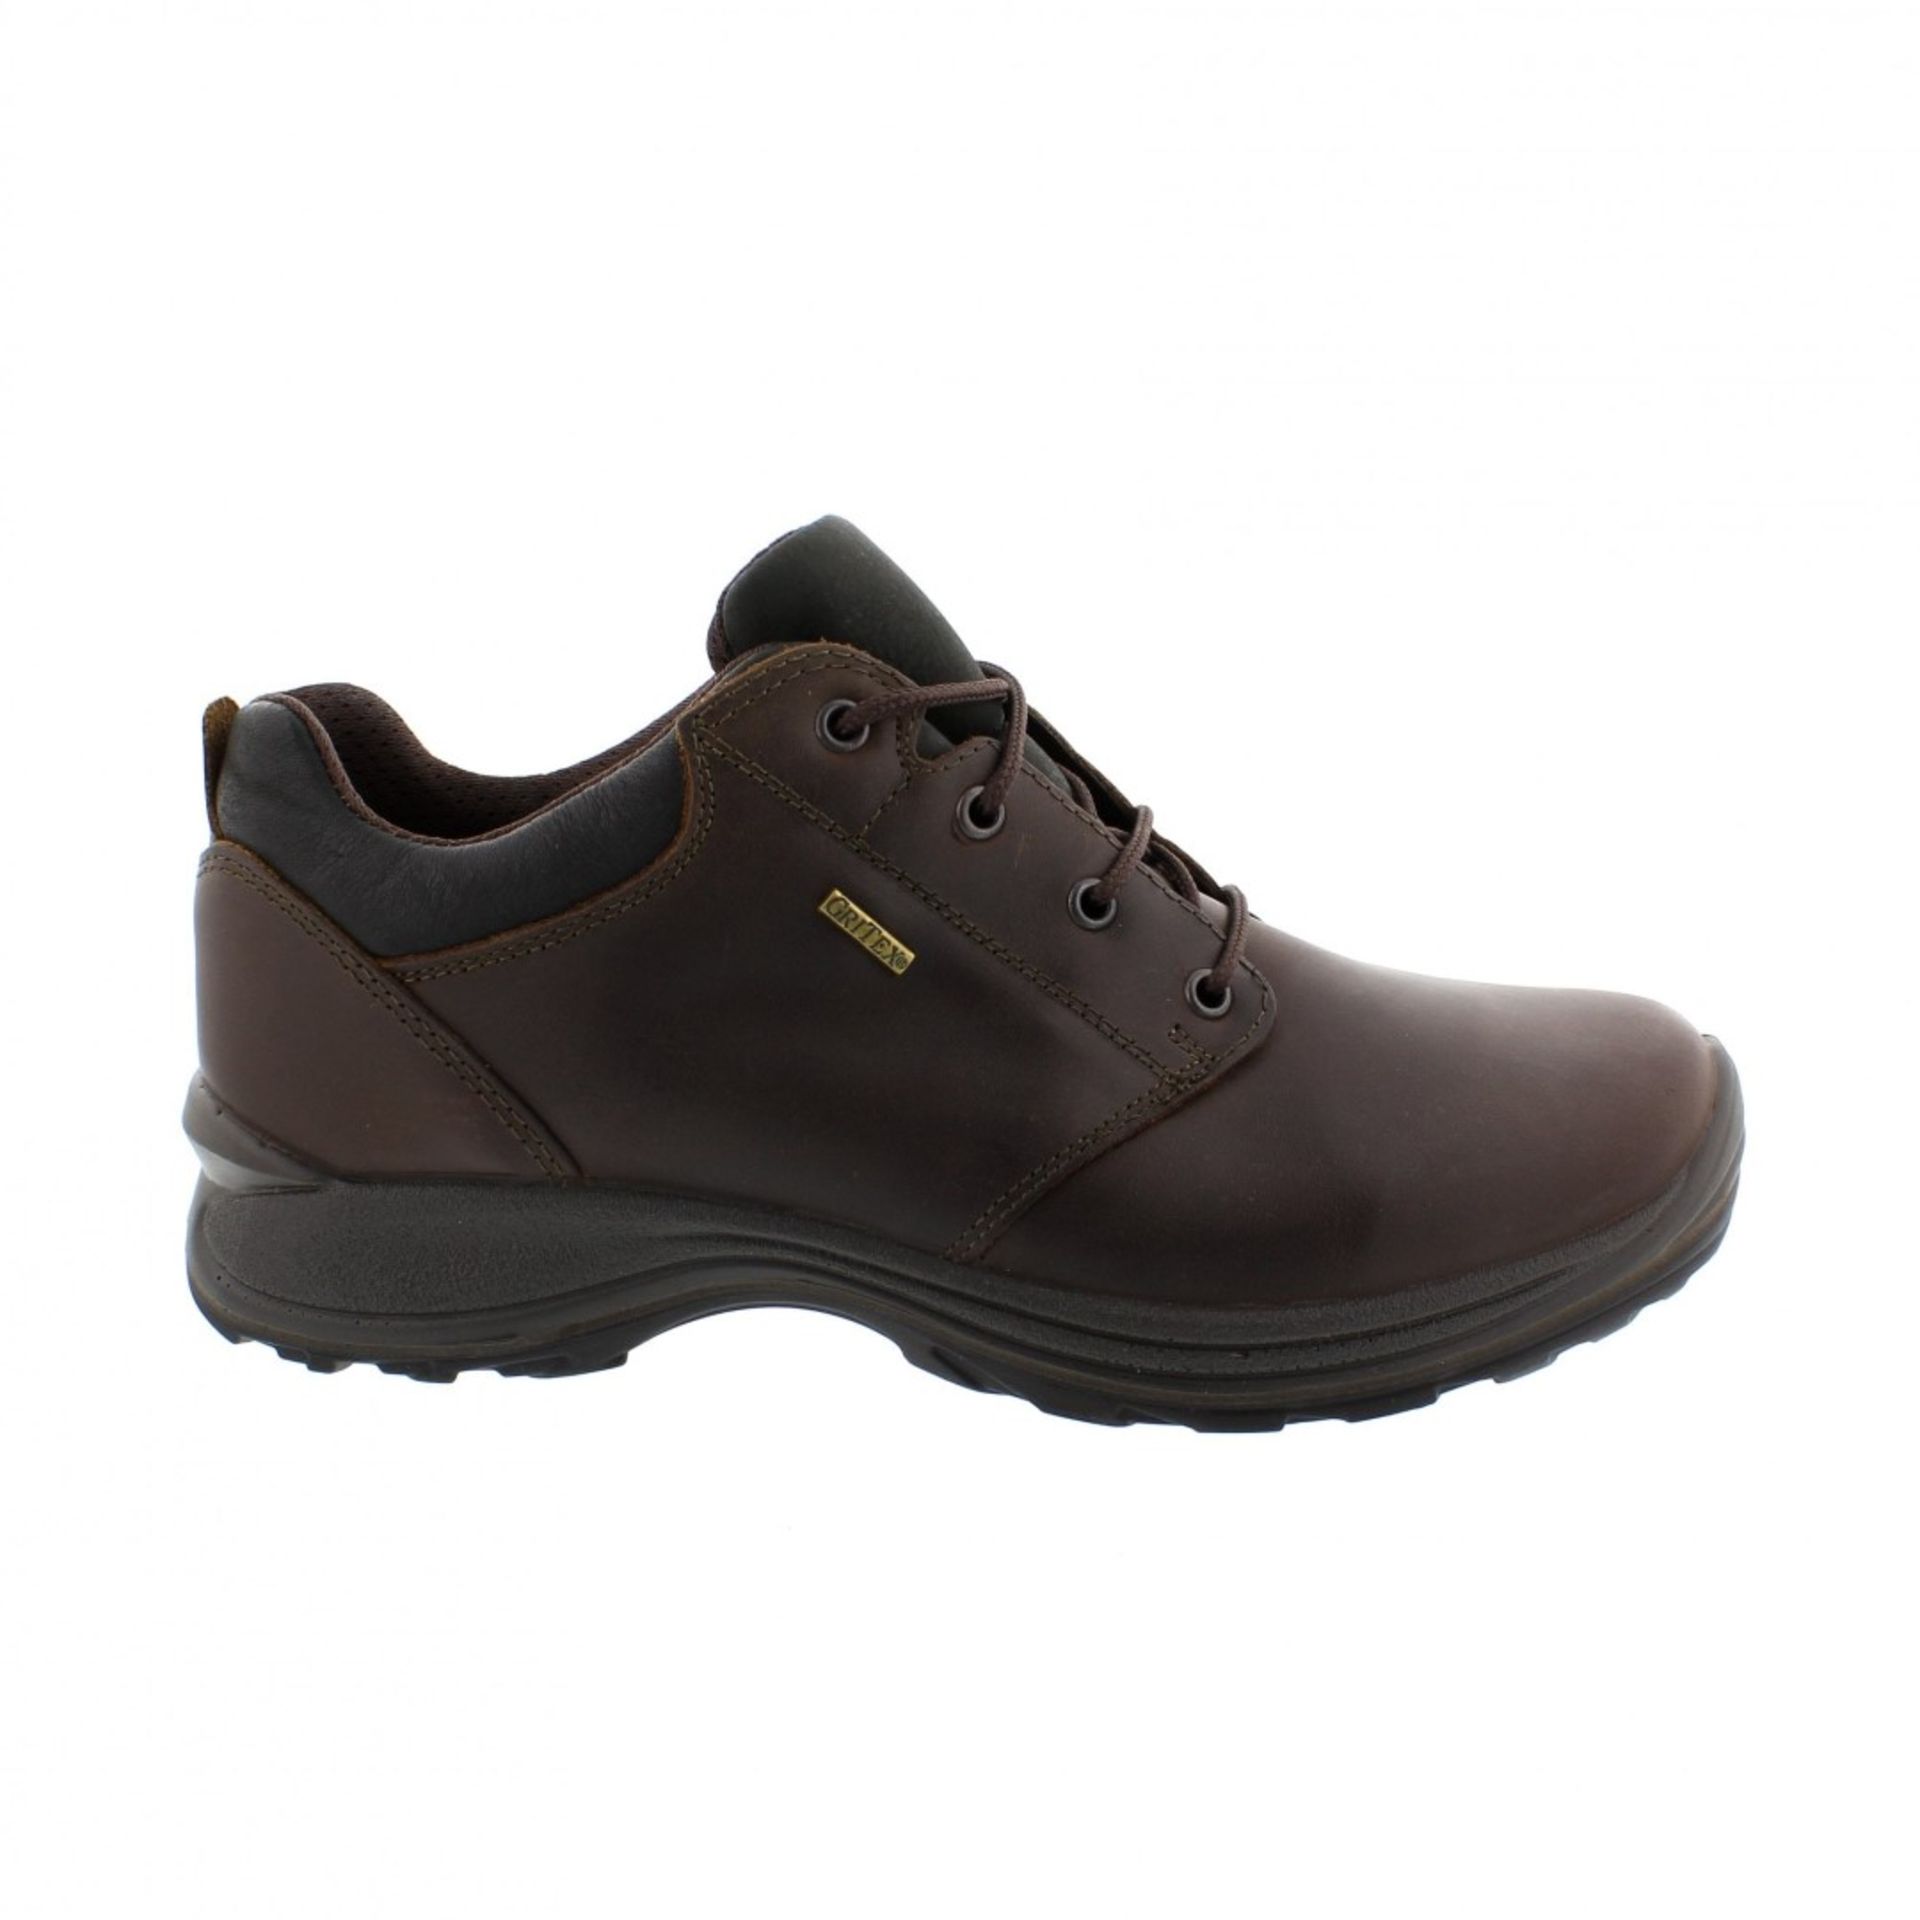 1 x Pair of Men's Grisport Brown Leather GriTex Shoes - Rogerson Footwear - Brand New and Boxed - - Image 10 of 10